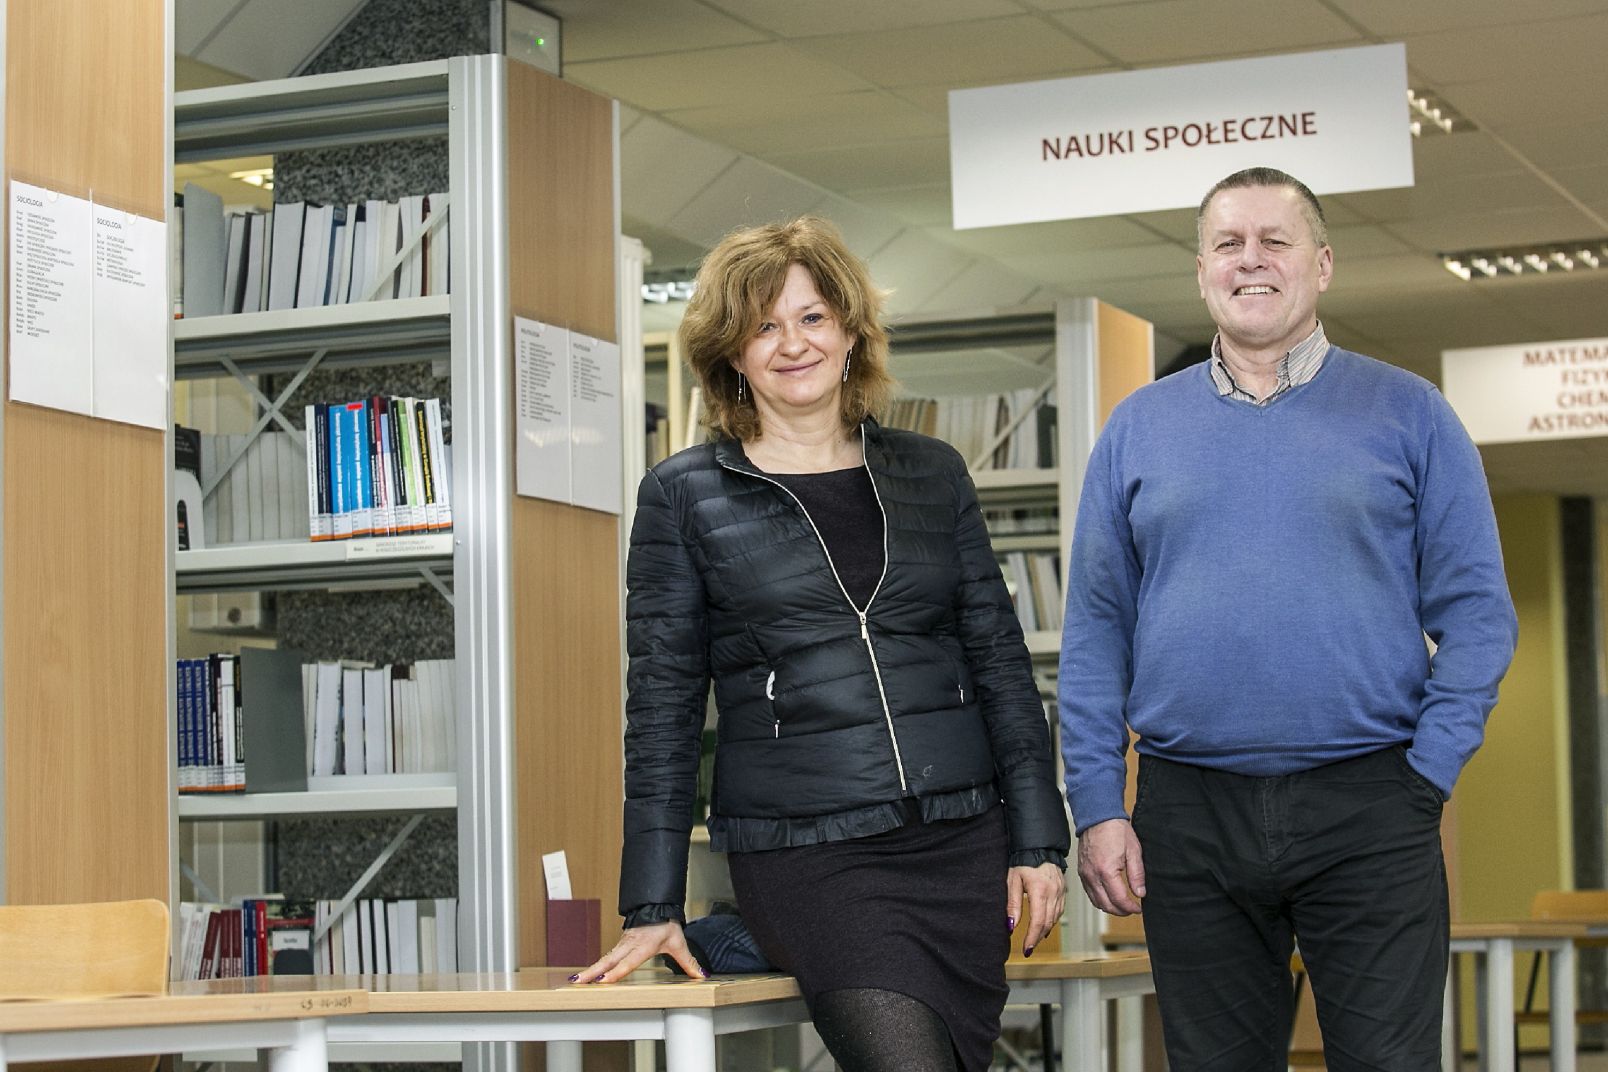 Prof. Beata Przyborowska and Prof. Piotr Błajet, researchers from the Nicolaus Copernicus University, authors of a study on changes in students' health behaviour.